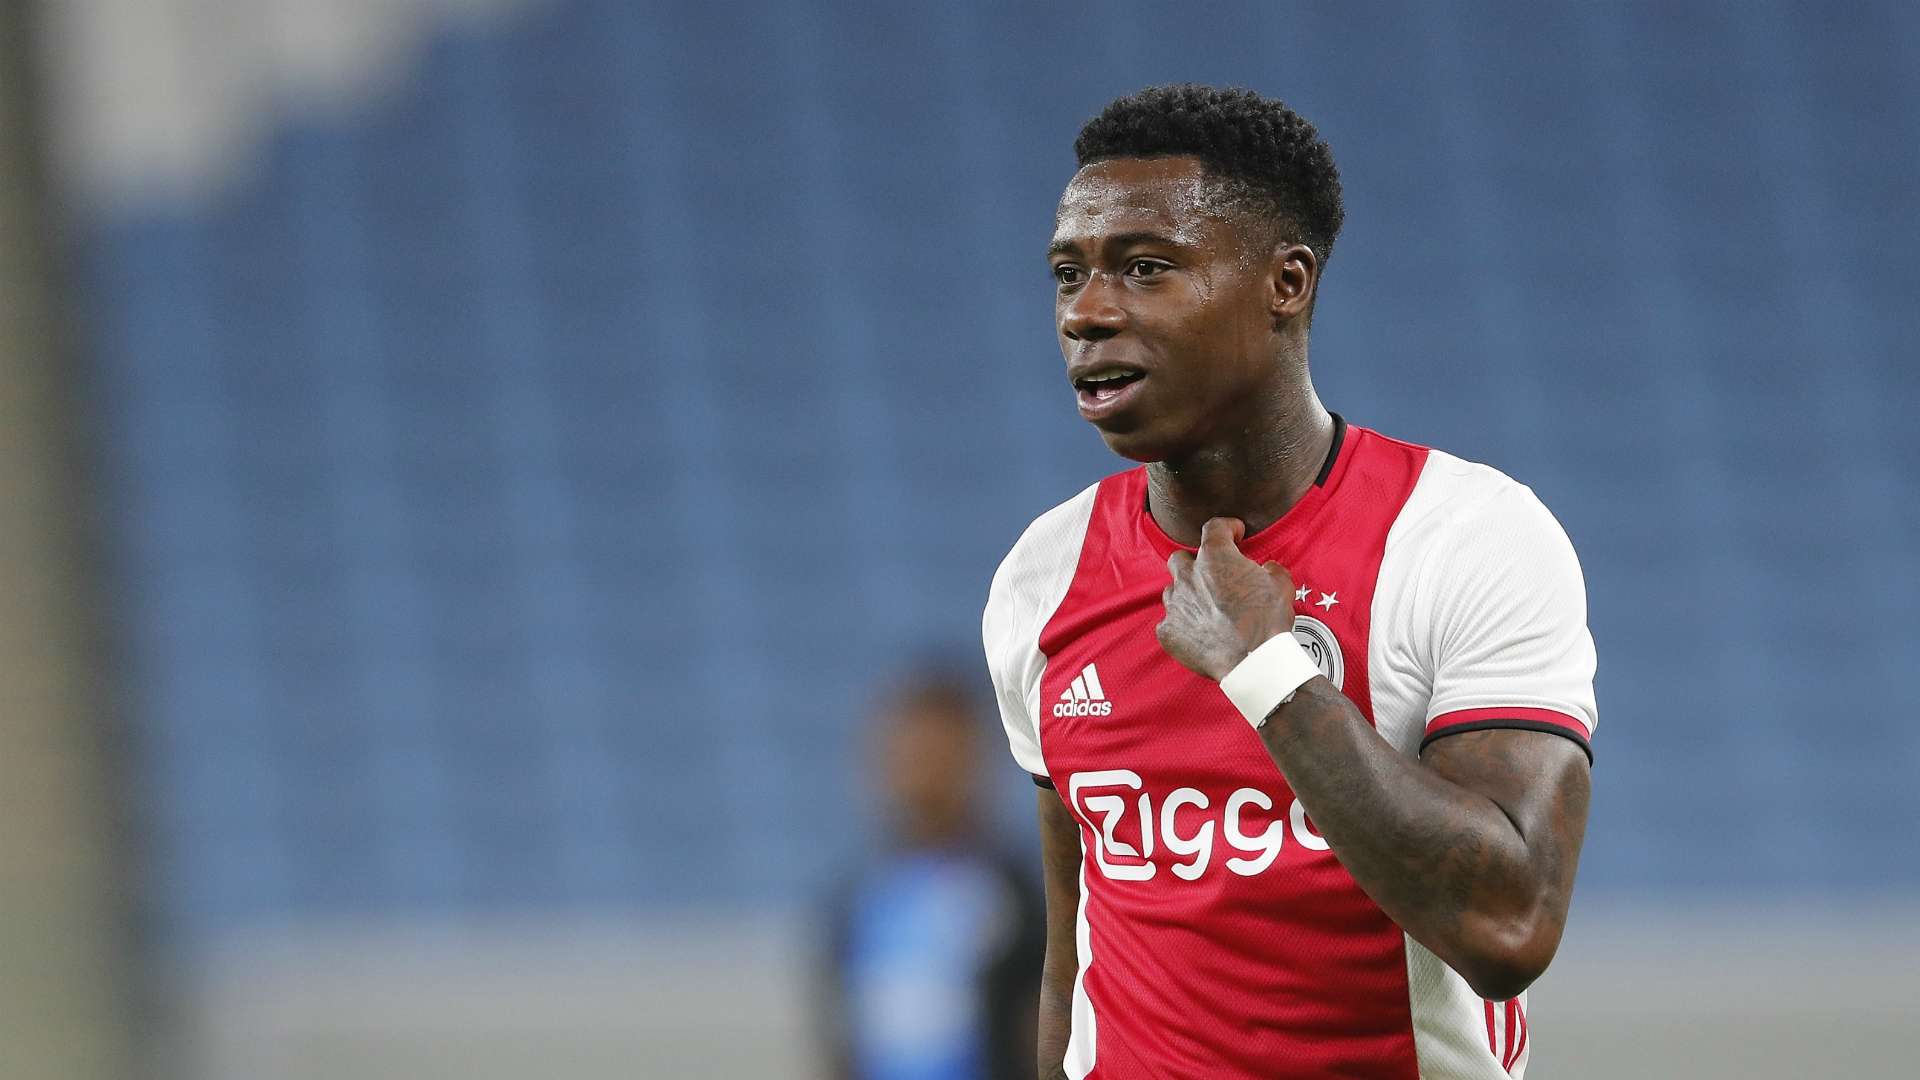 Quincy Promes, Ajax, 01112020 *USE ON GOAL NETHERLANDS ONLY*